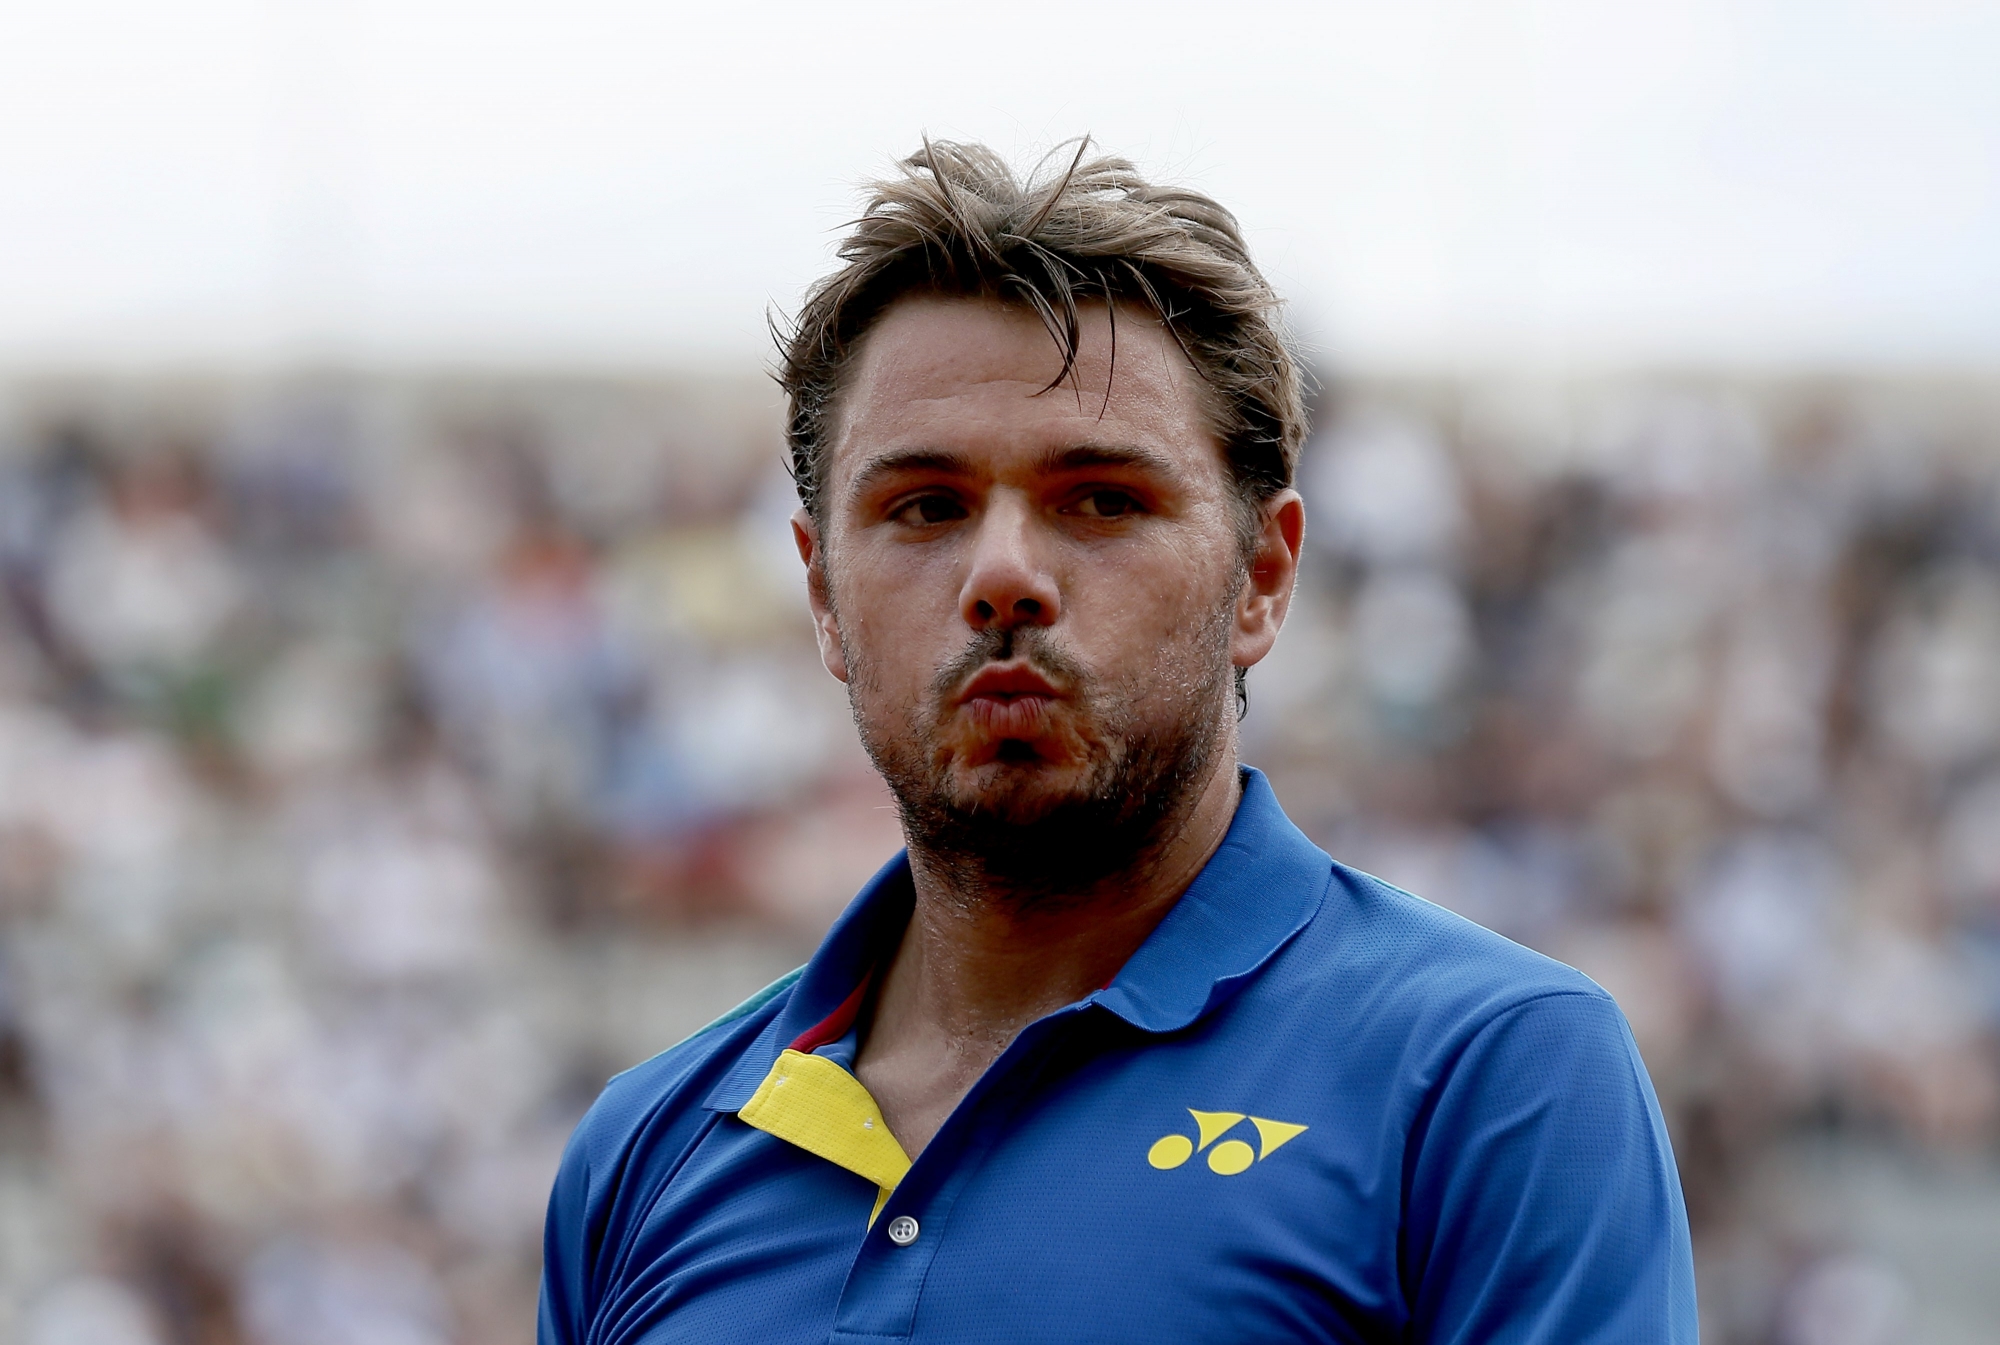 epa05999149 Stan Wawrinka of Switzerland reacts as he plays against Jozef Kovalik of Slovakia during their menís 1st round single match during the French Open tennis tournament at Roland Garros in Paris, France, 30 May 2017.  EPA/ETIENNE LAURENT